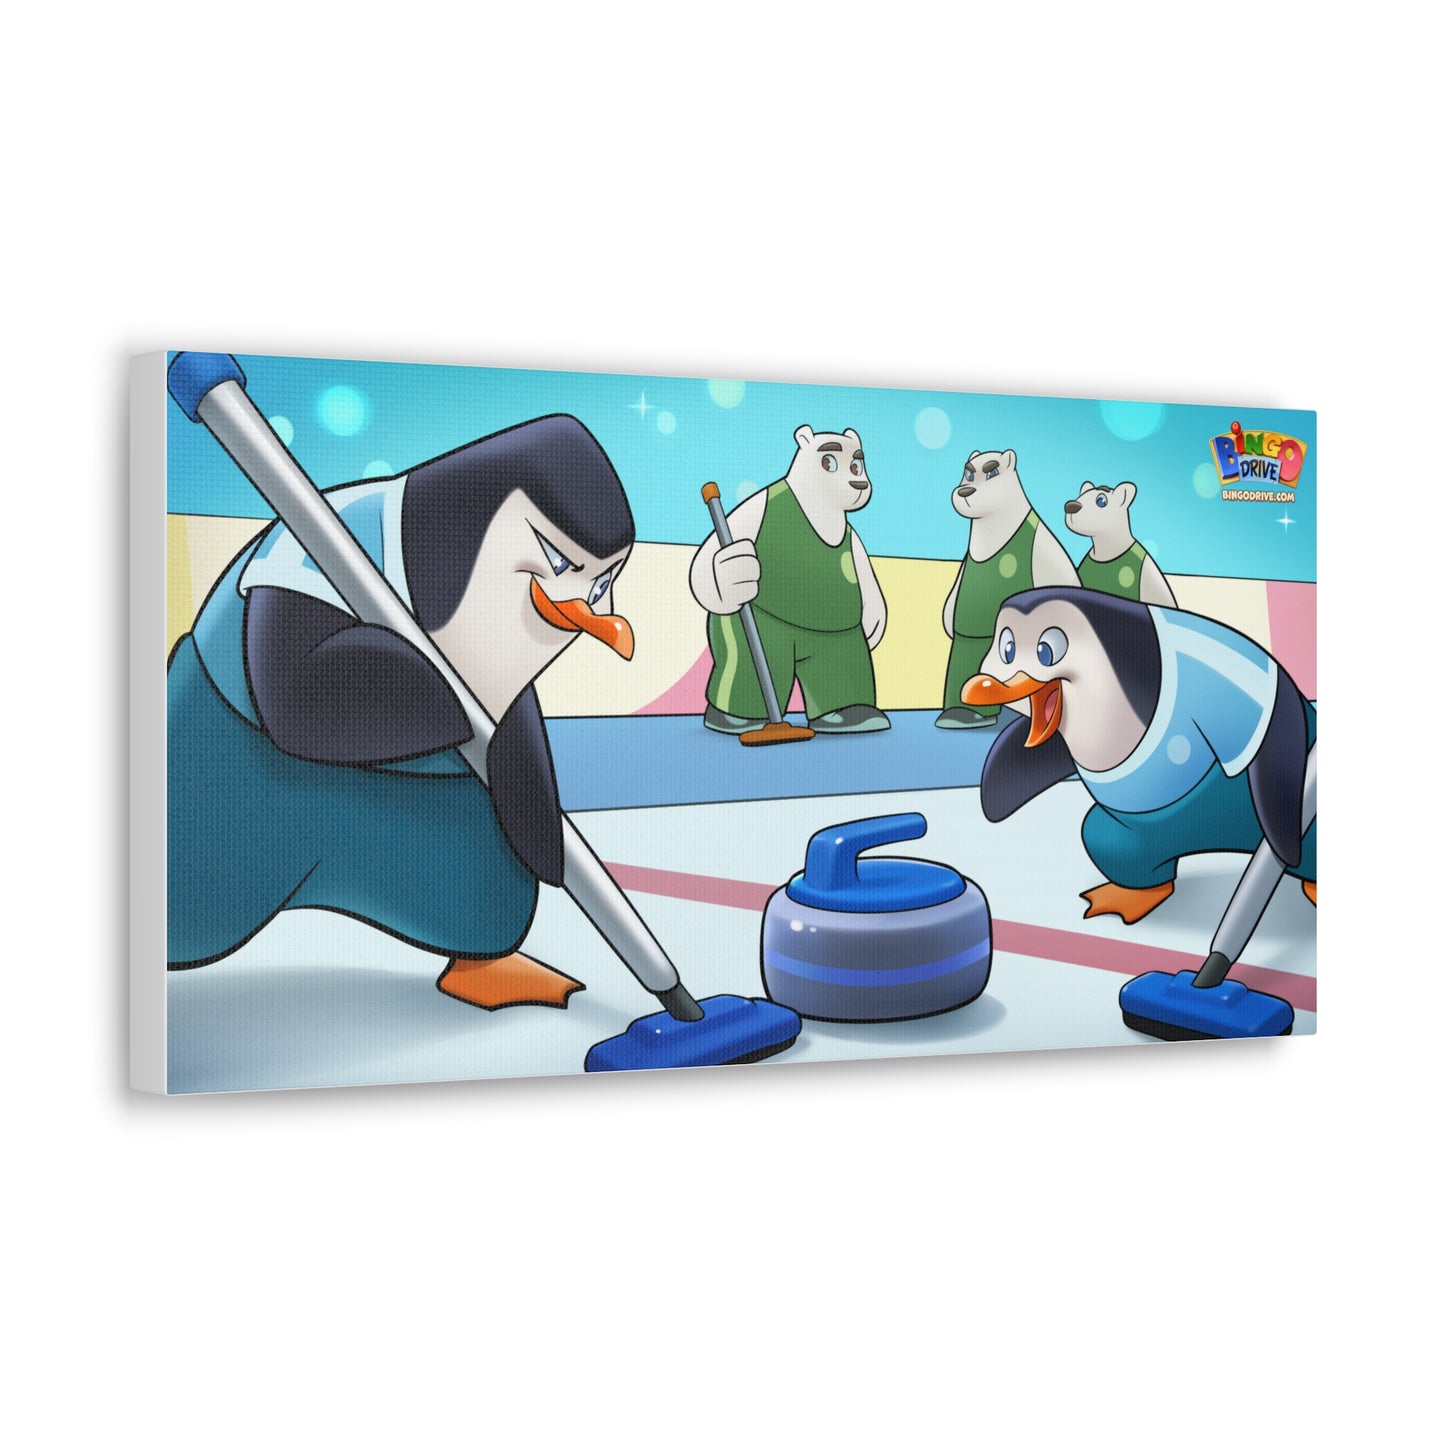 Curling Match - Canvas Gallery Wraps